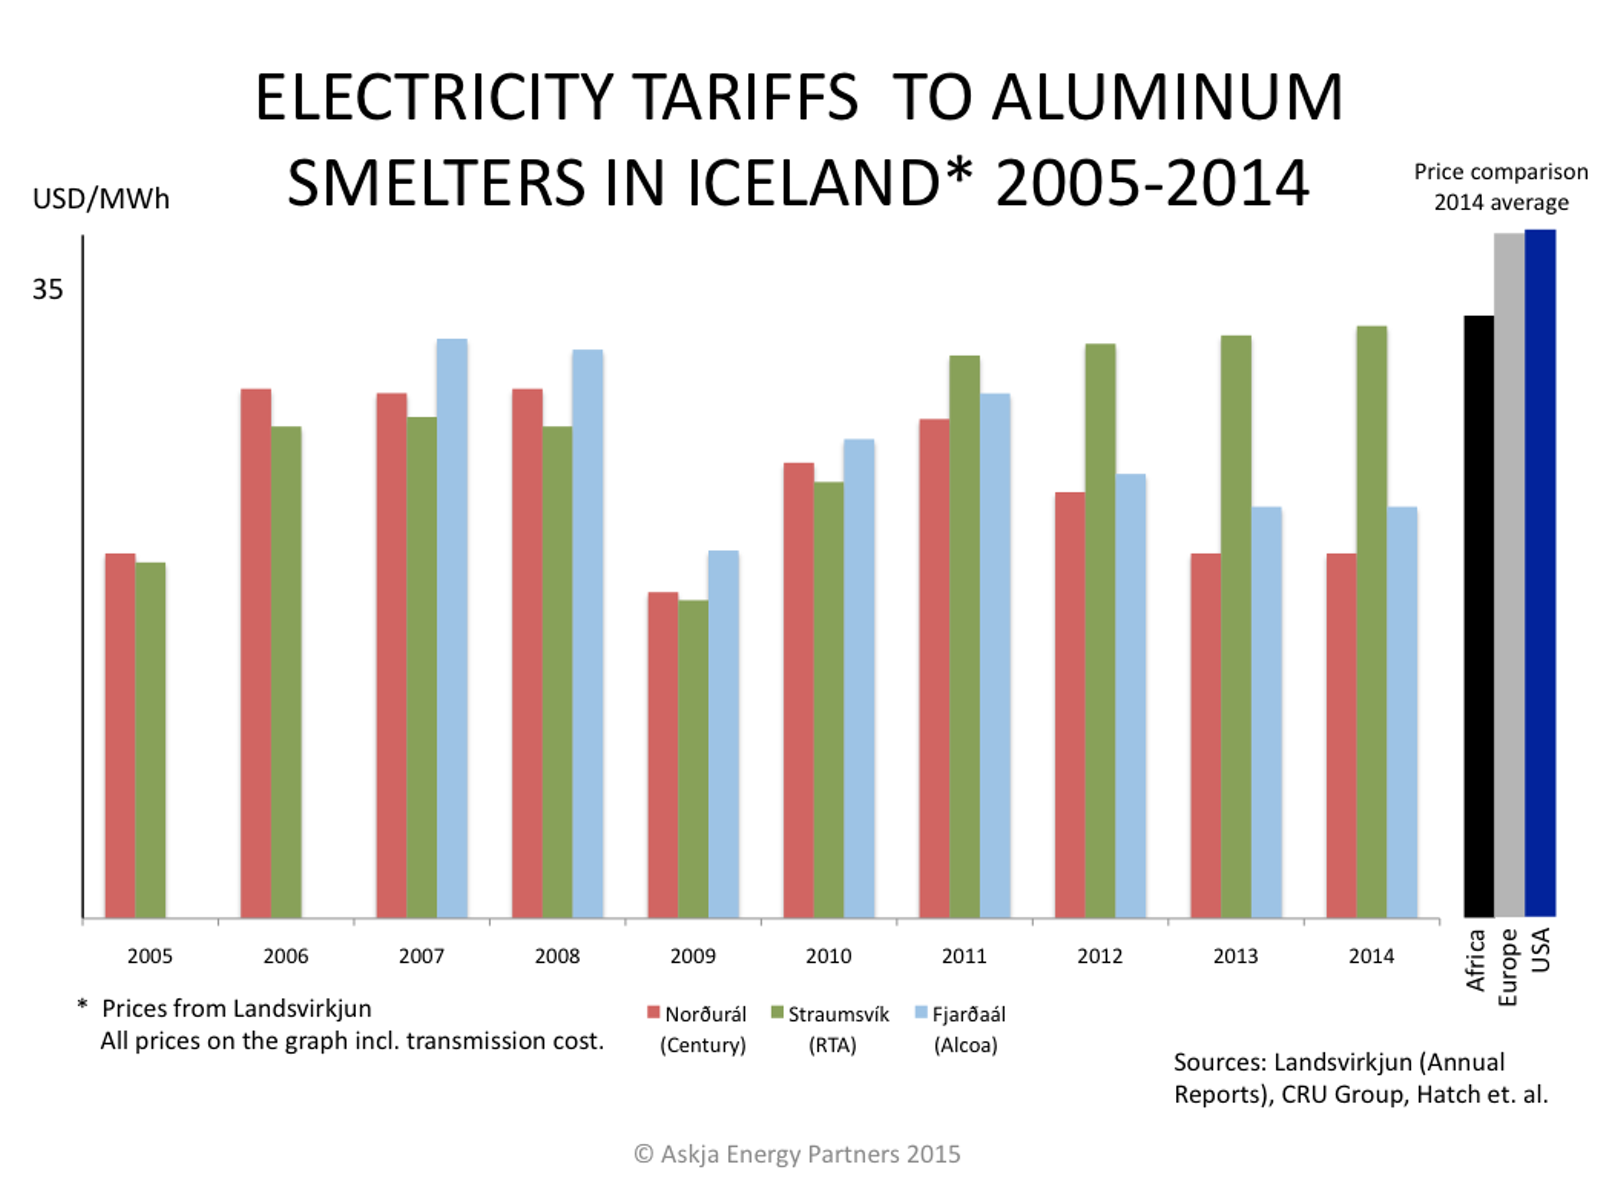 Aluminum-Electricity-Tariffs-to-Smelters-in-Iceland_2005-2014_and-World-Comparison_Askja-Energy-Partners-Current-2015